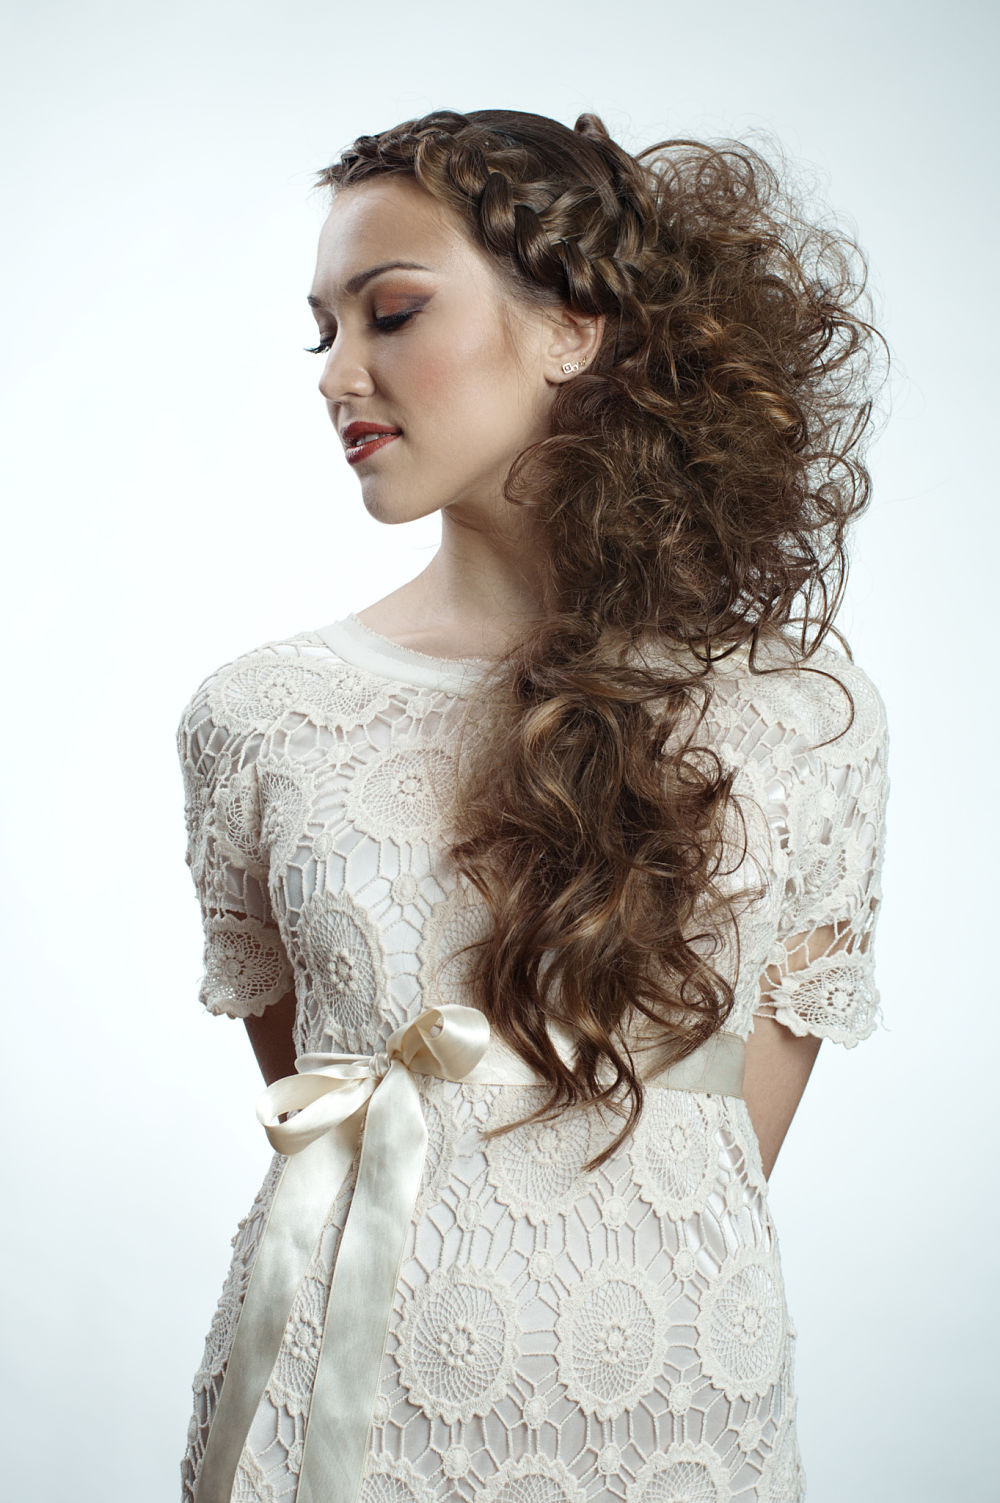 Prom Hairstyle Curly Hair
 Let’s Turn Some Heads DIY Prom Hairstyle ´Dos For Curly